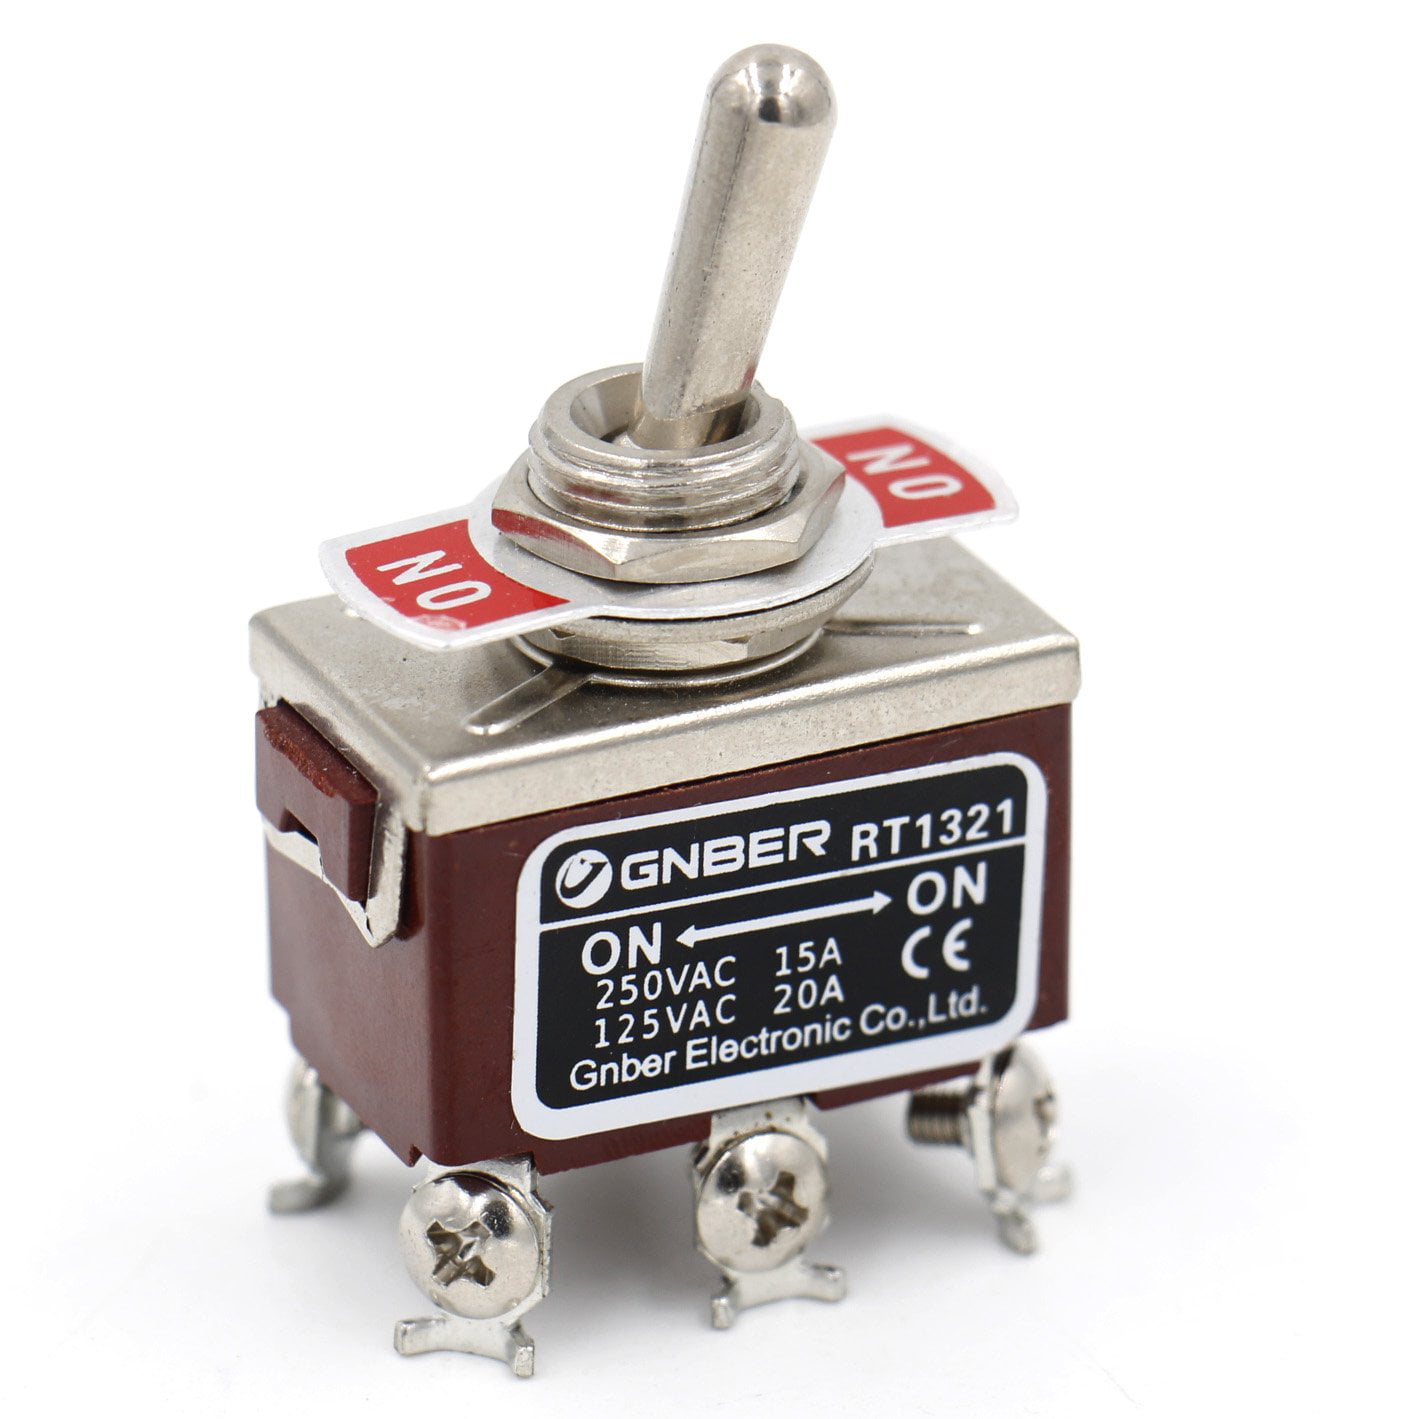 5 x On-Off Toggle Switch Screw Terminals 250V 15A DPST 